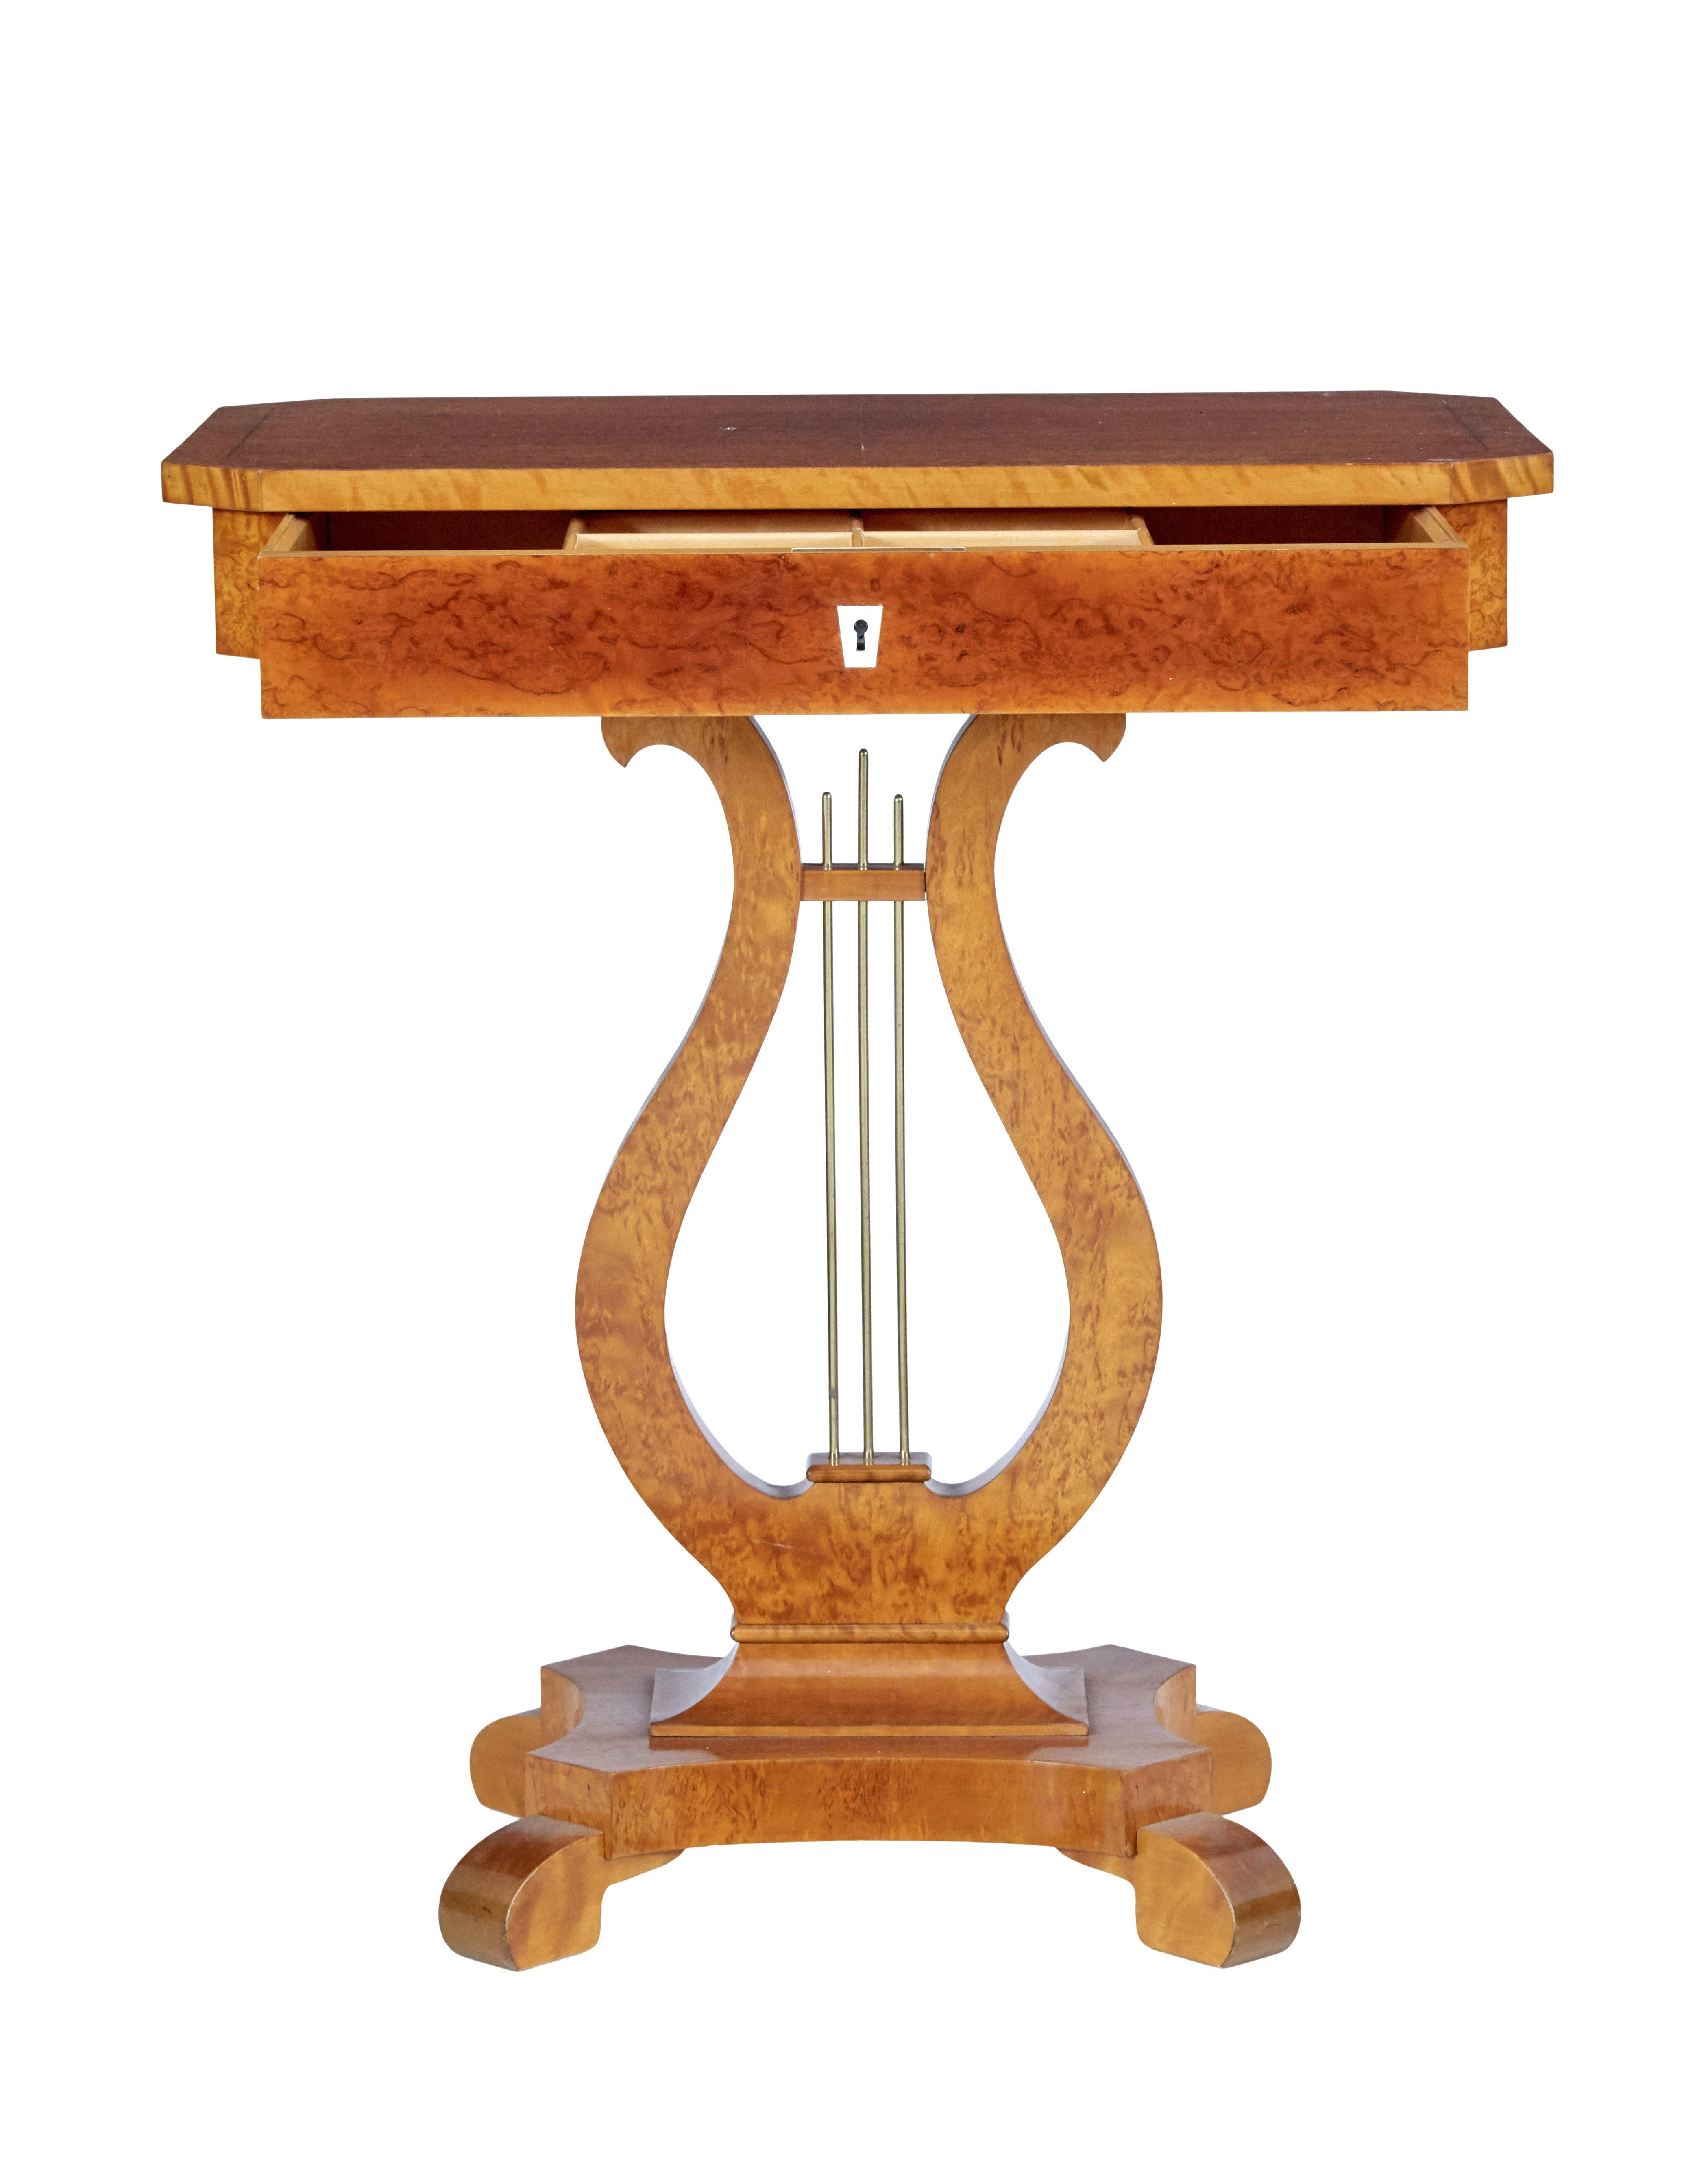 19th century Swedish birch lyre form occasional table, circa 1890.

Rectangular top with canted corners, veneered in burr birch with salt and pepper stringing detail. Single drawer below which is fitted with compartments. Stands on a lyre form